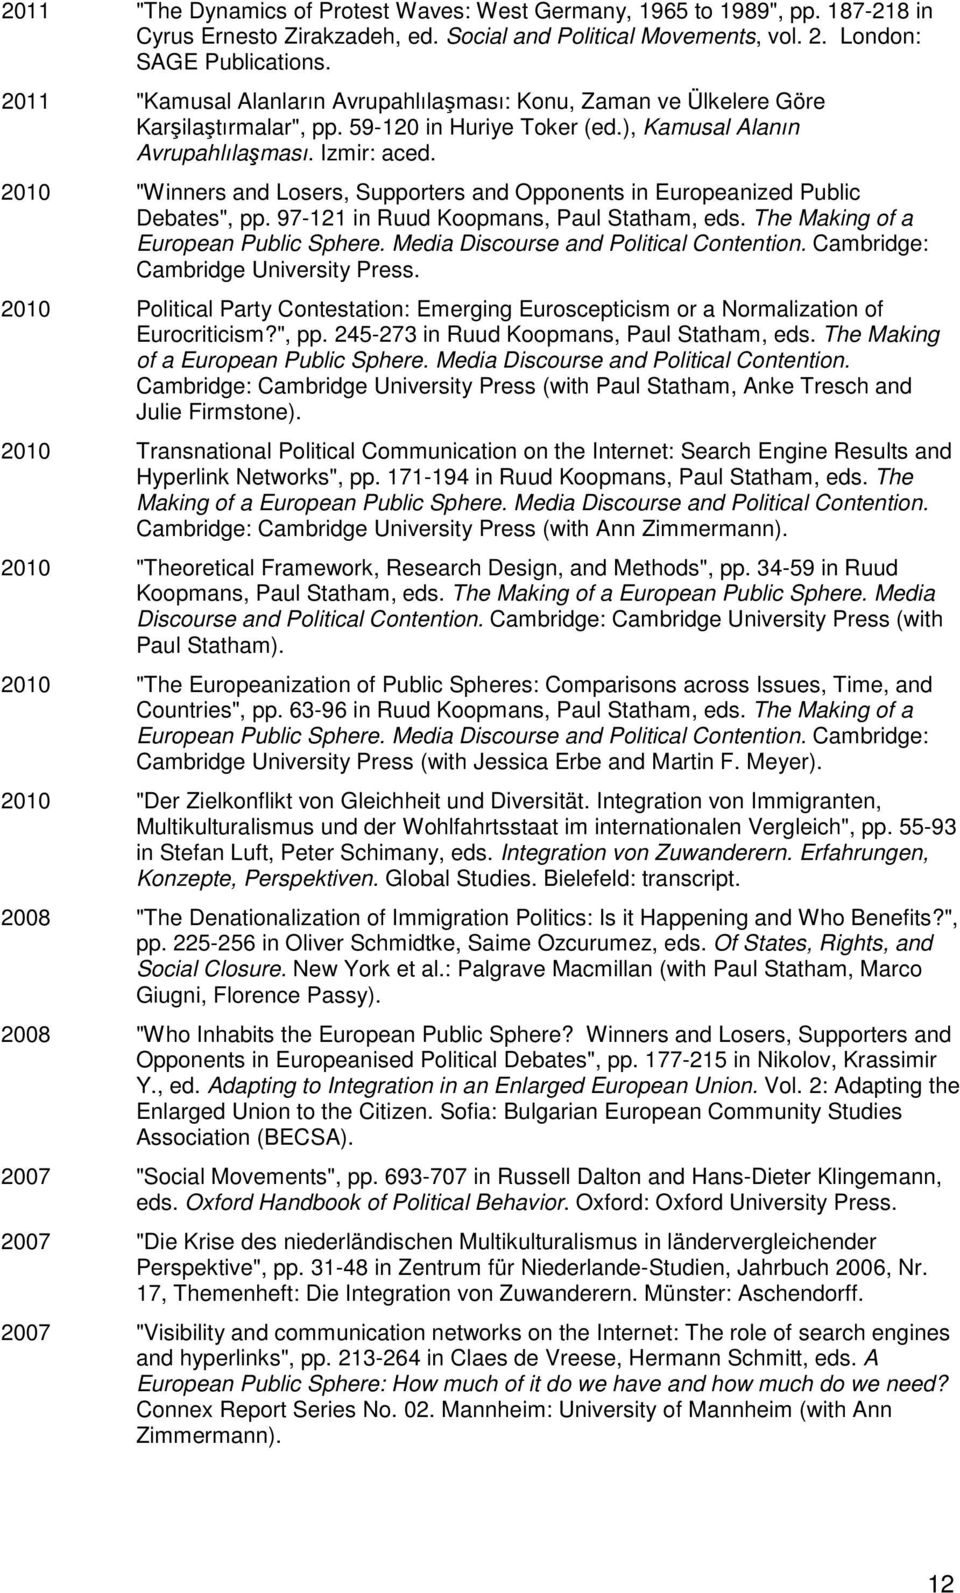 2010 "Winners and Losers, Supporters and Opponents in Europeanized Public Debates", pp. 97-121 in Ruud Koopmans, Paul Statham, eds. The Making of a European Public Sphere.